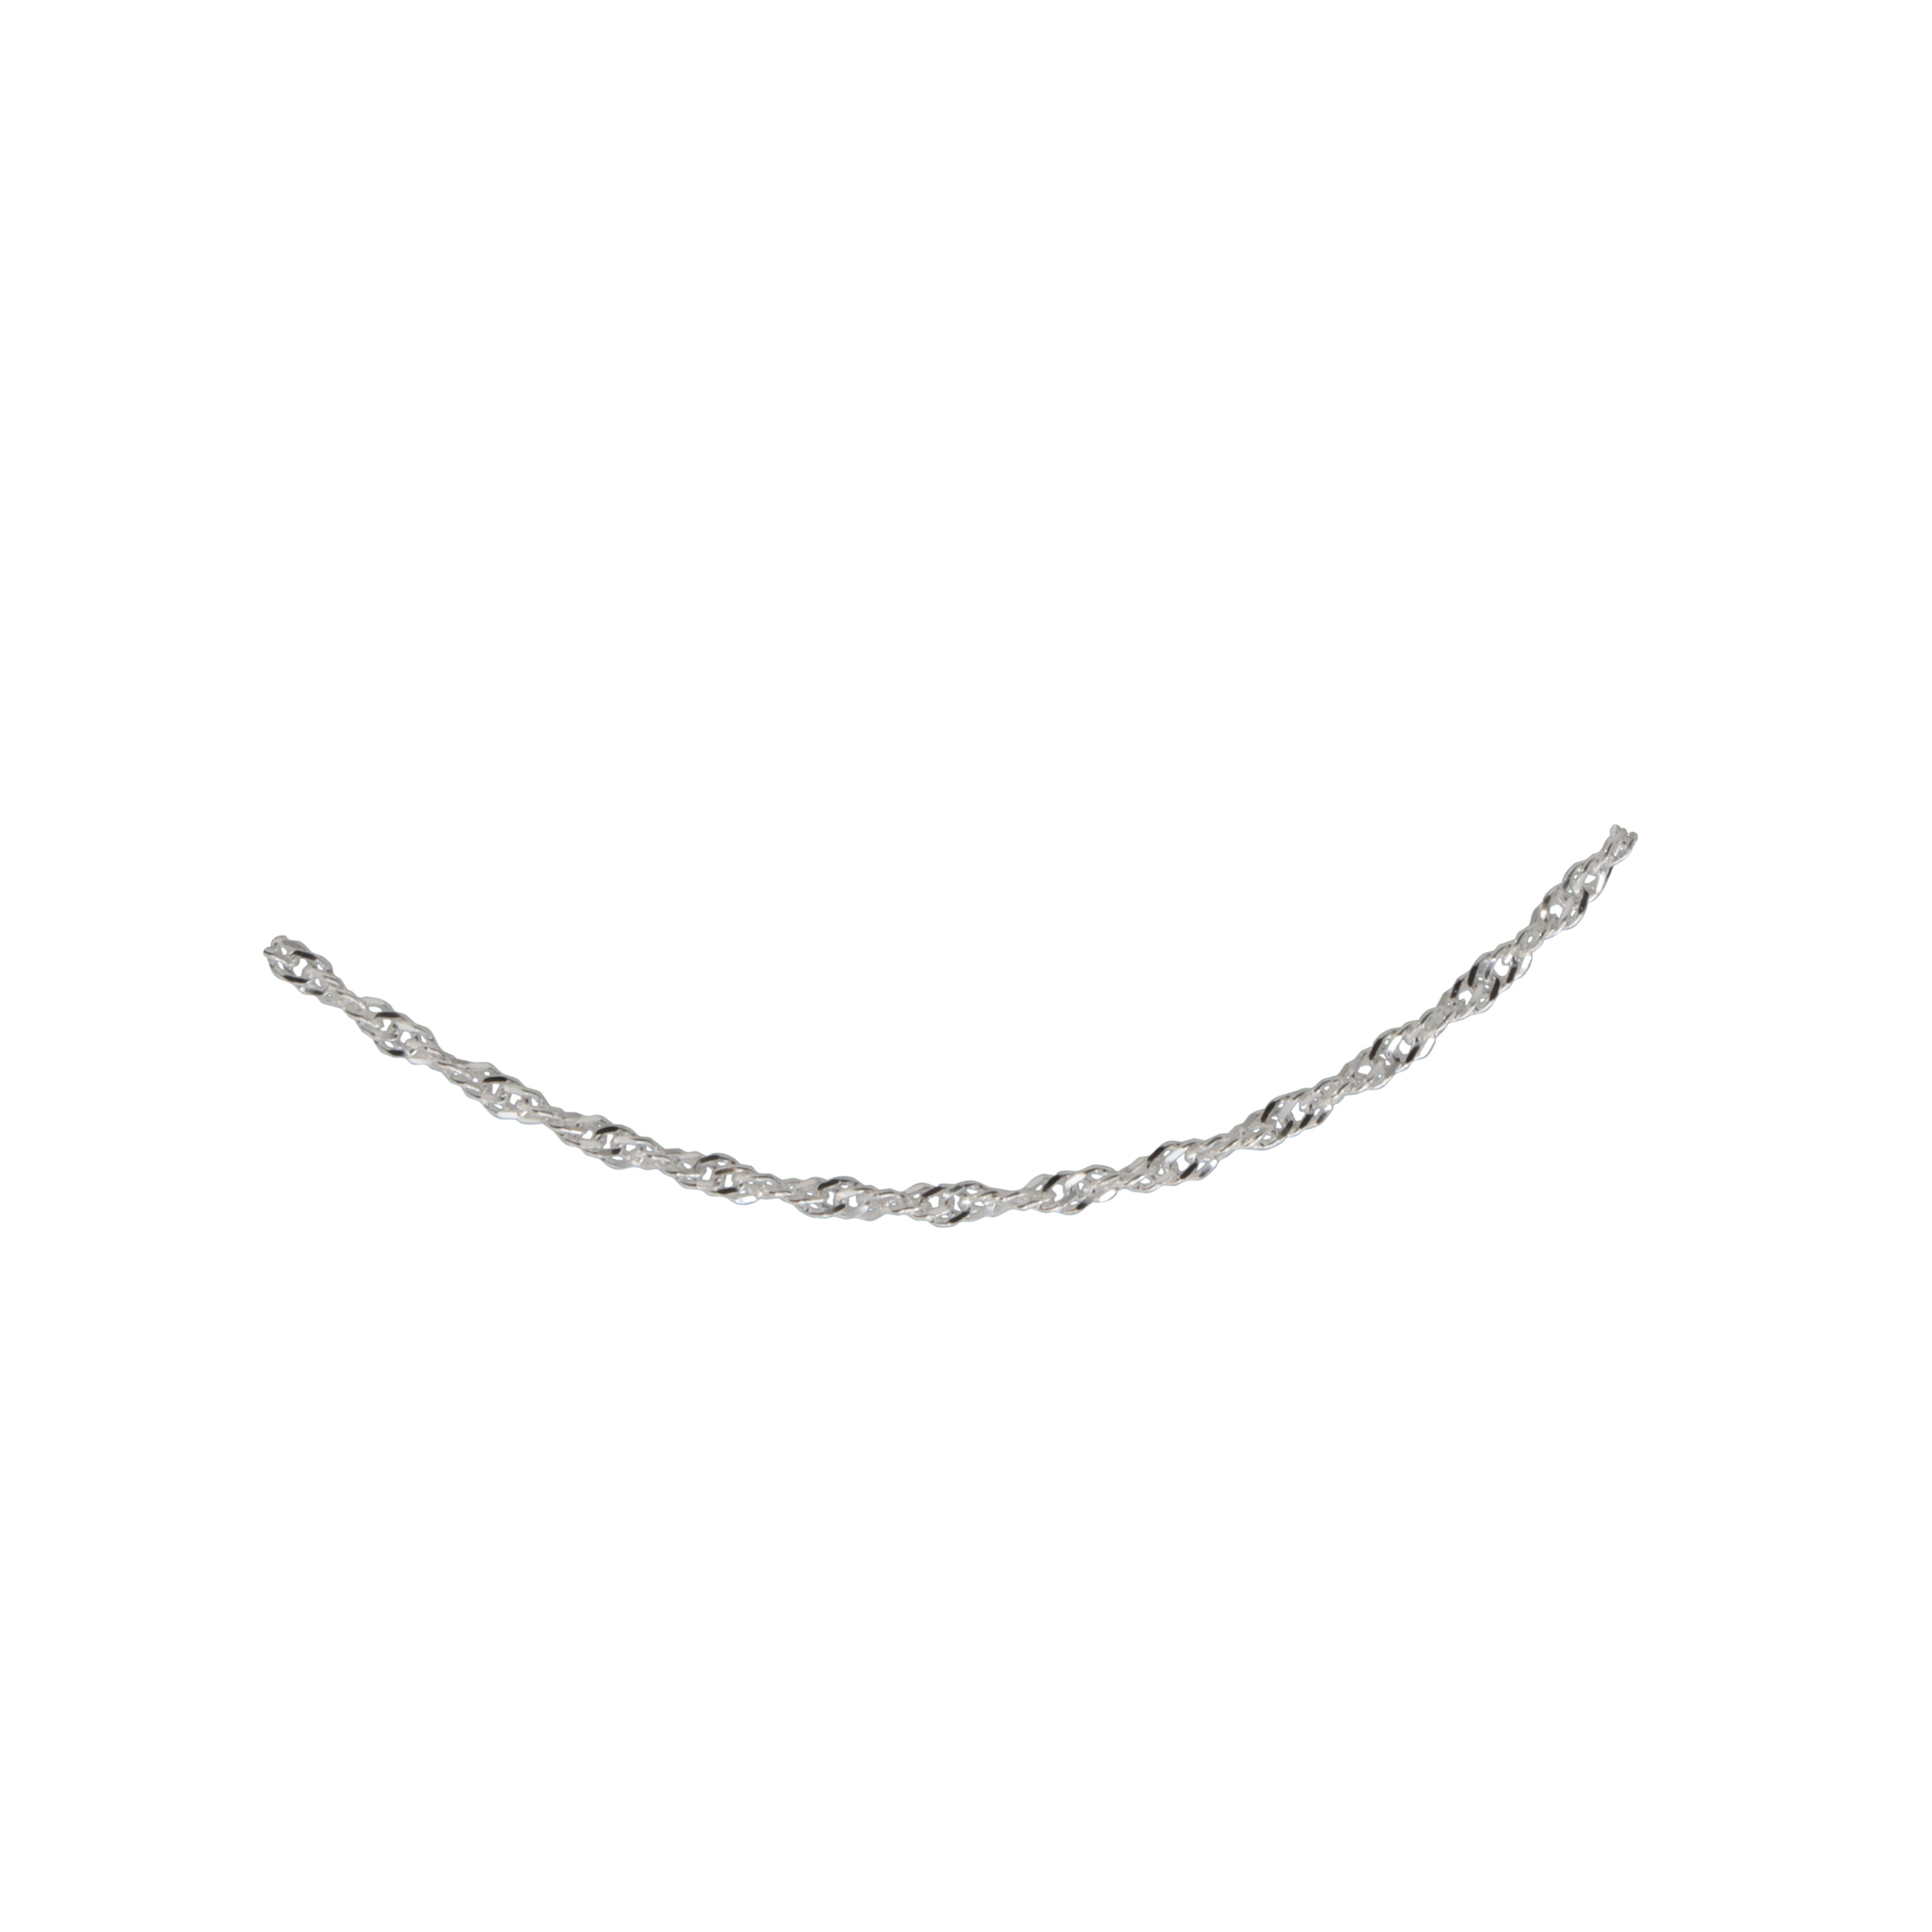 Brilliance Sterling Silver 1,8mm Singapore Chain, 20inch Necklace. Made In Italy